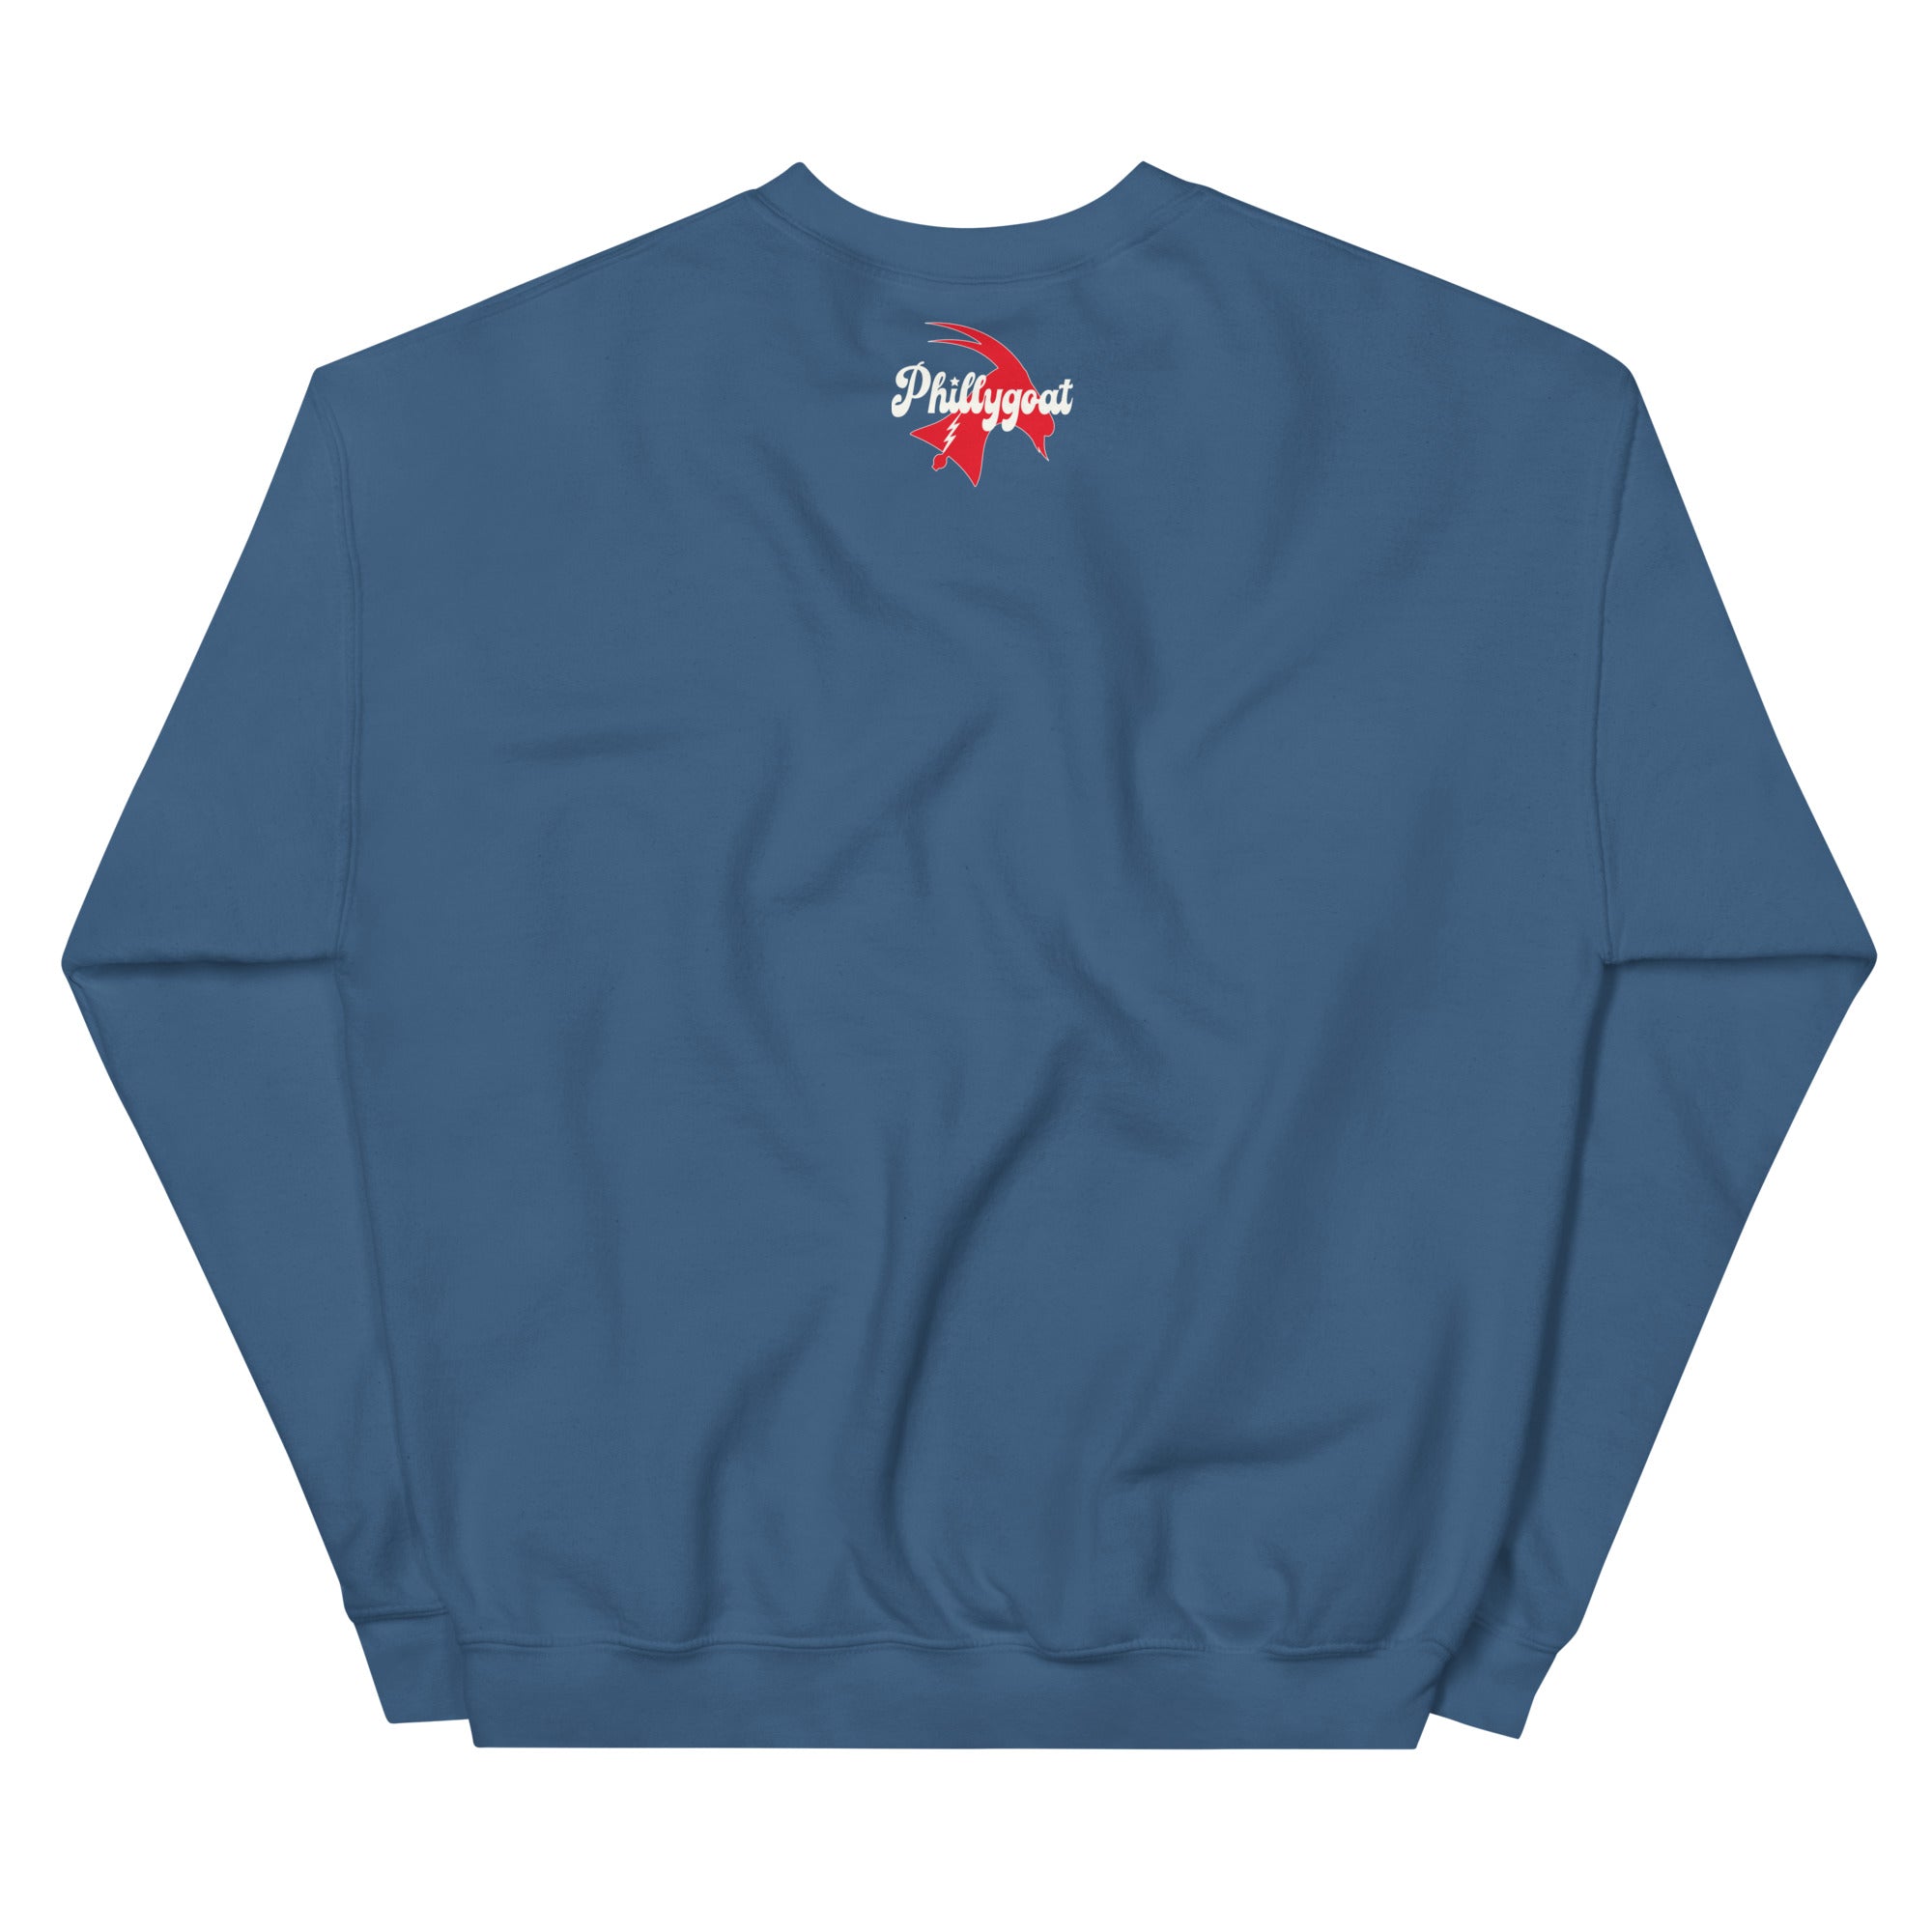 "The Bryce Is Right" Sweatshirt